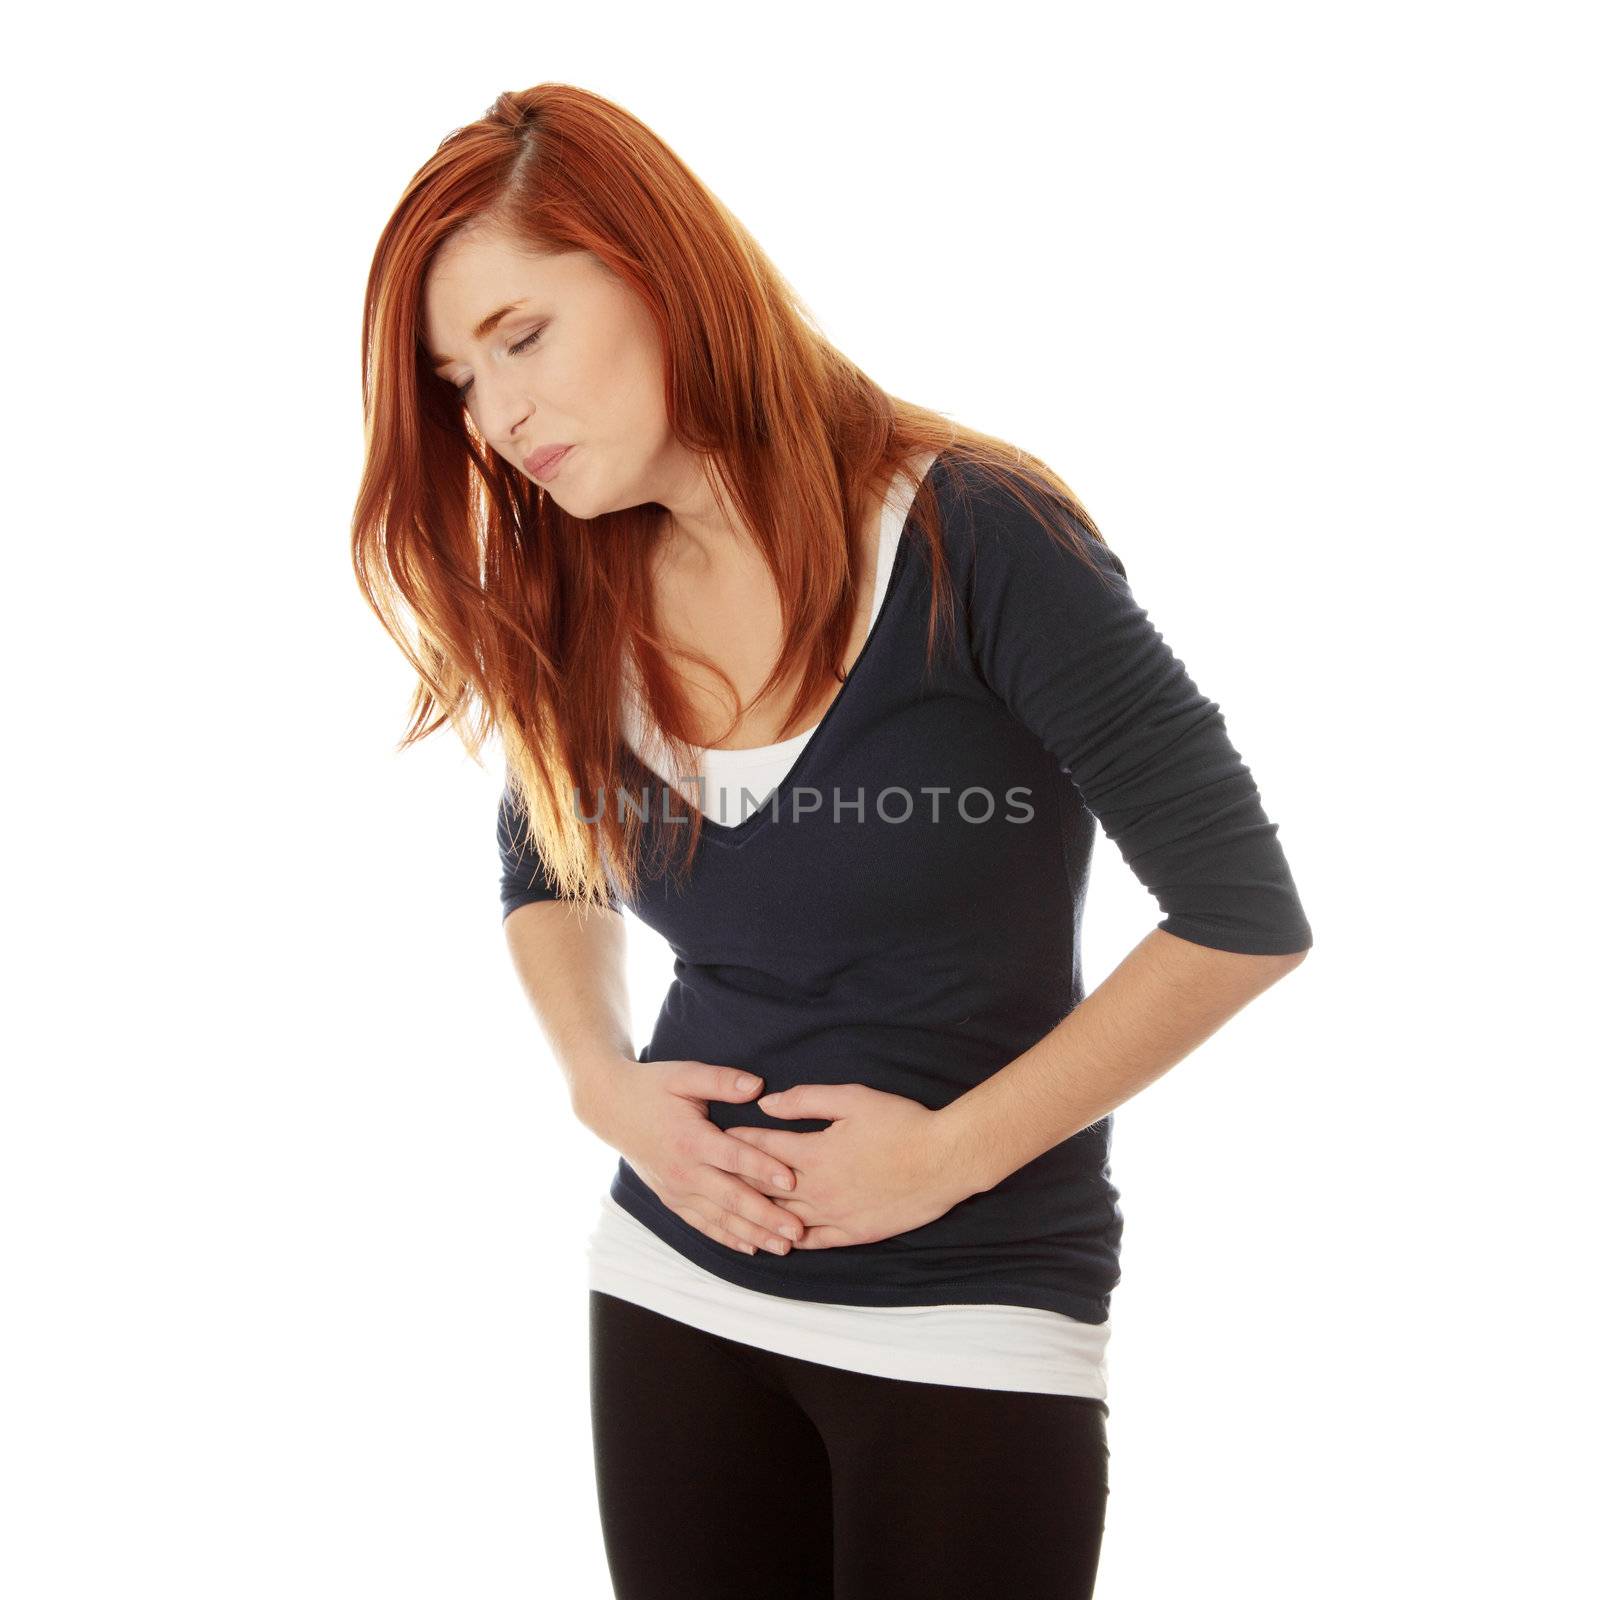 Woman with stomach issues by BDS